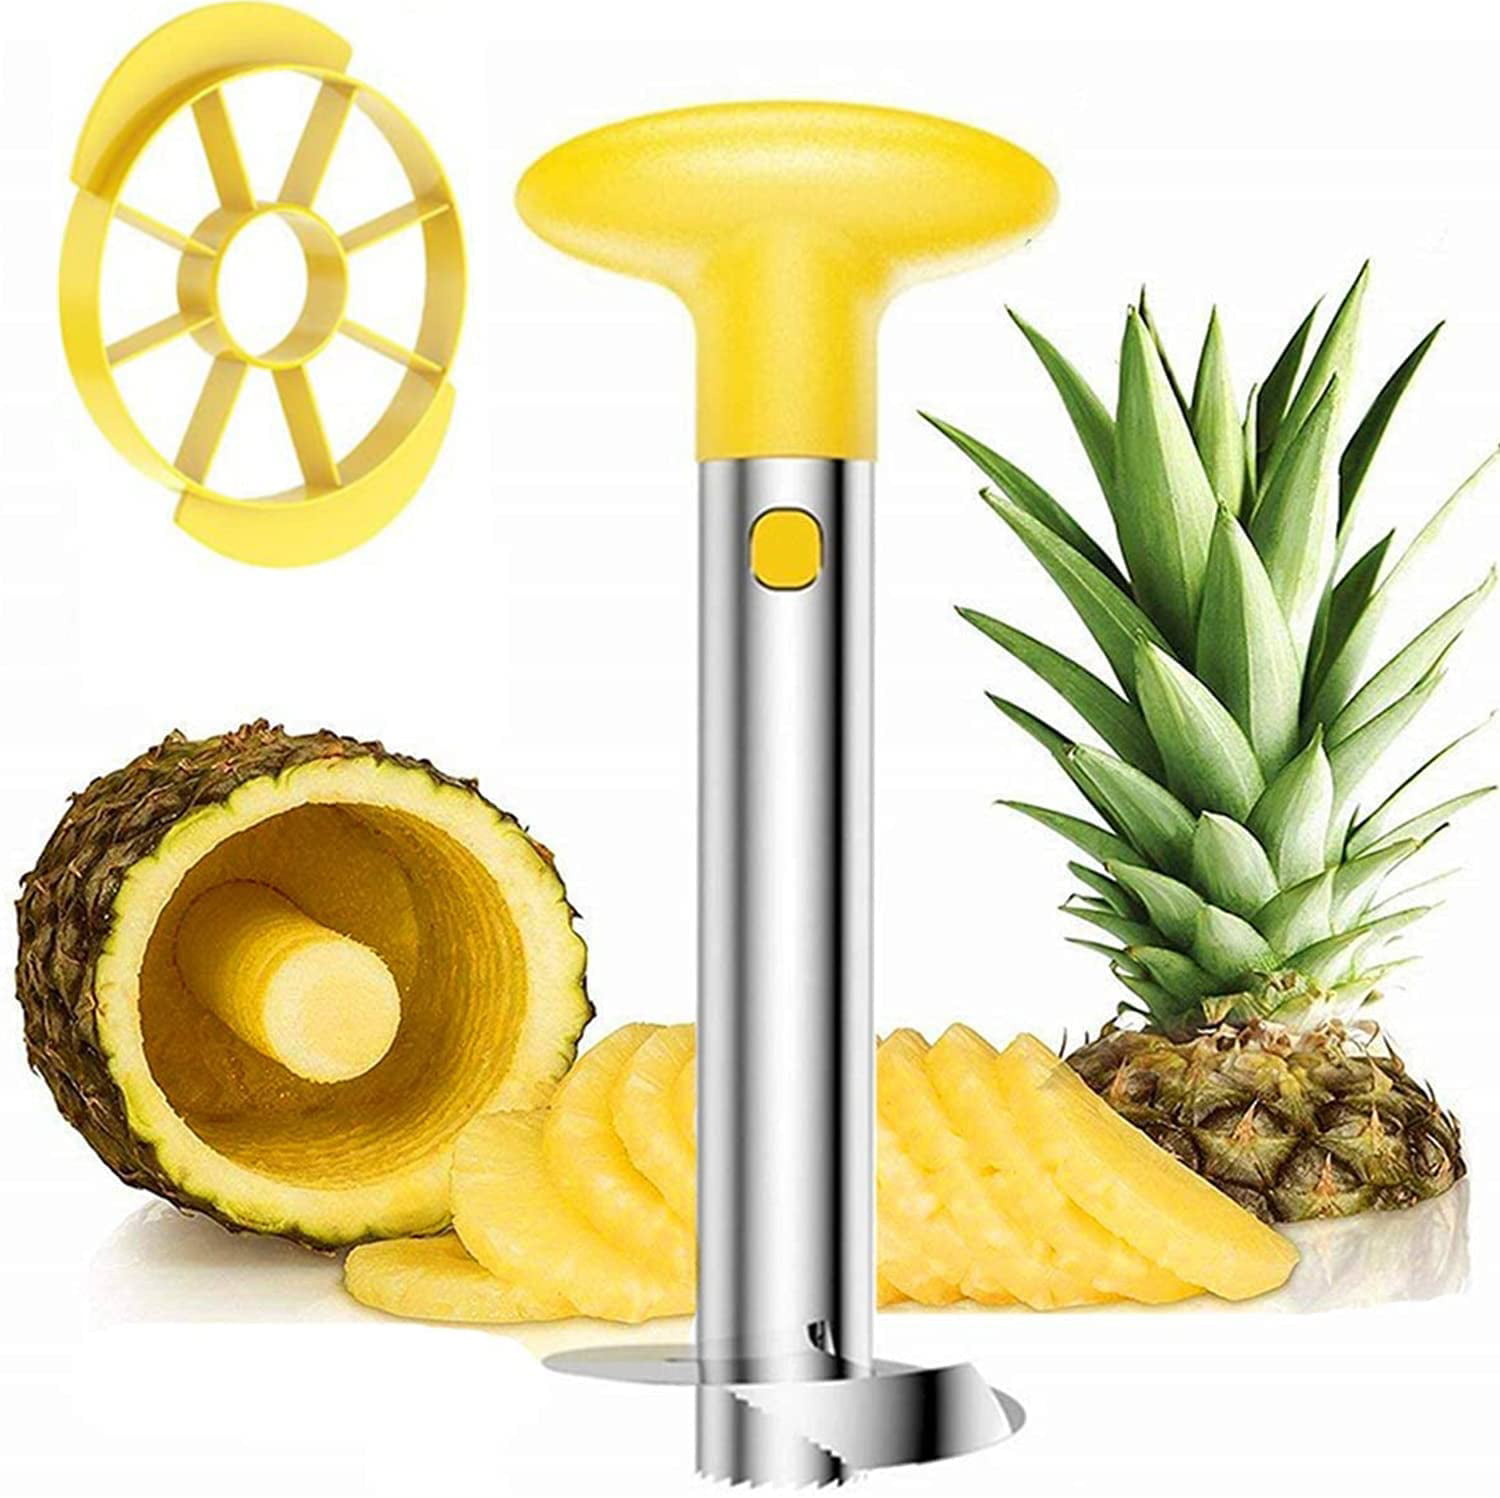 Easy Cleaning Kitchen Tools Pineapple Peeler Fruit Slicers Pineapple Cutter 